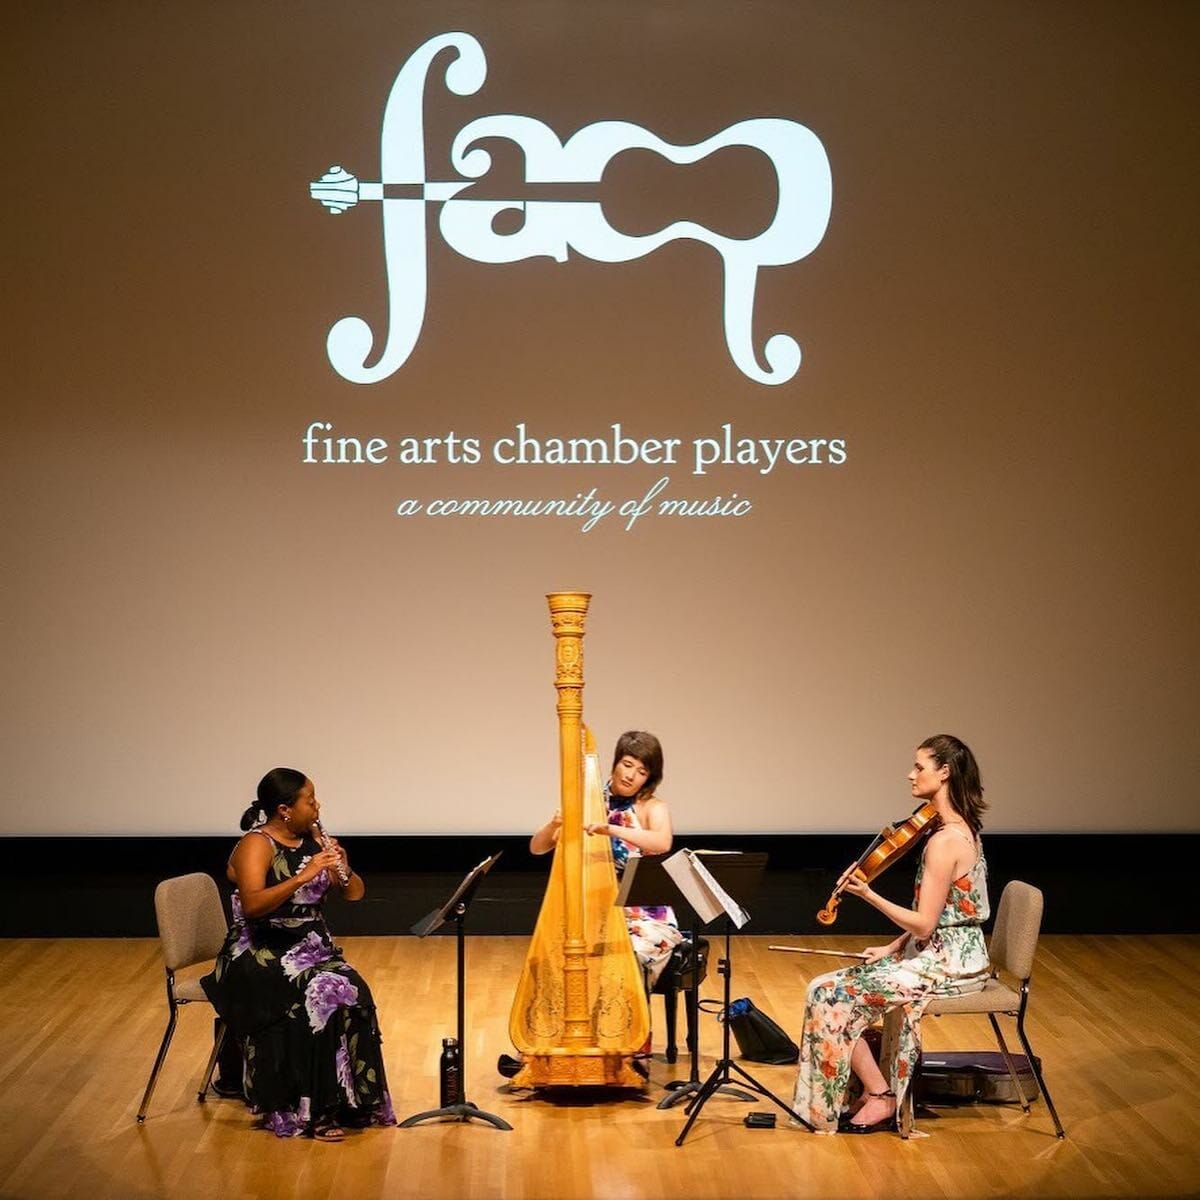 Three musicians on stage with the logo and title of the Fine Arts Chamber Players on a screen behind them